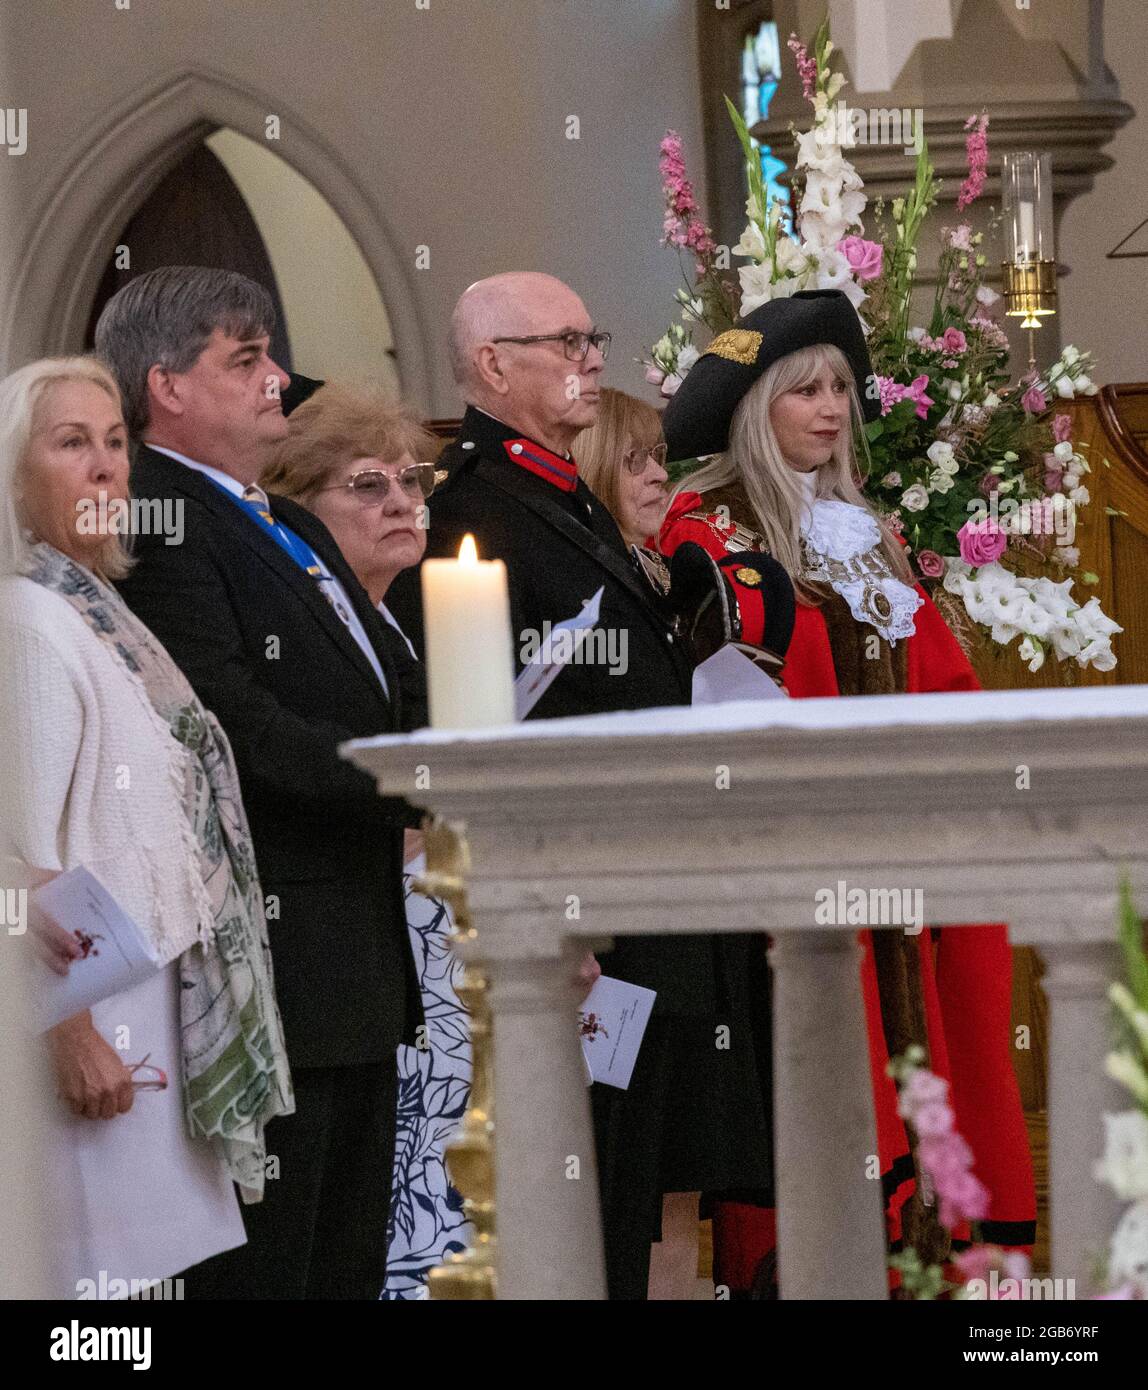 Brentwood, UK. 02nd Aug, 2021. Brentwood Essex 2nd August 2021 A solemn Vespers service for the inauguration of Councillor Ms Olivia Sanders Mayor of Brentwood at the Roman Catholic Cathedral of St Mary and St Helen Brentwood attended by nine mayors and Council Chairmen, as well as Mark Francois MP for Rayleigh and Wickford. Credit: Ian Davidson/Alamy Live News Stock Photo